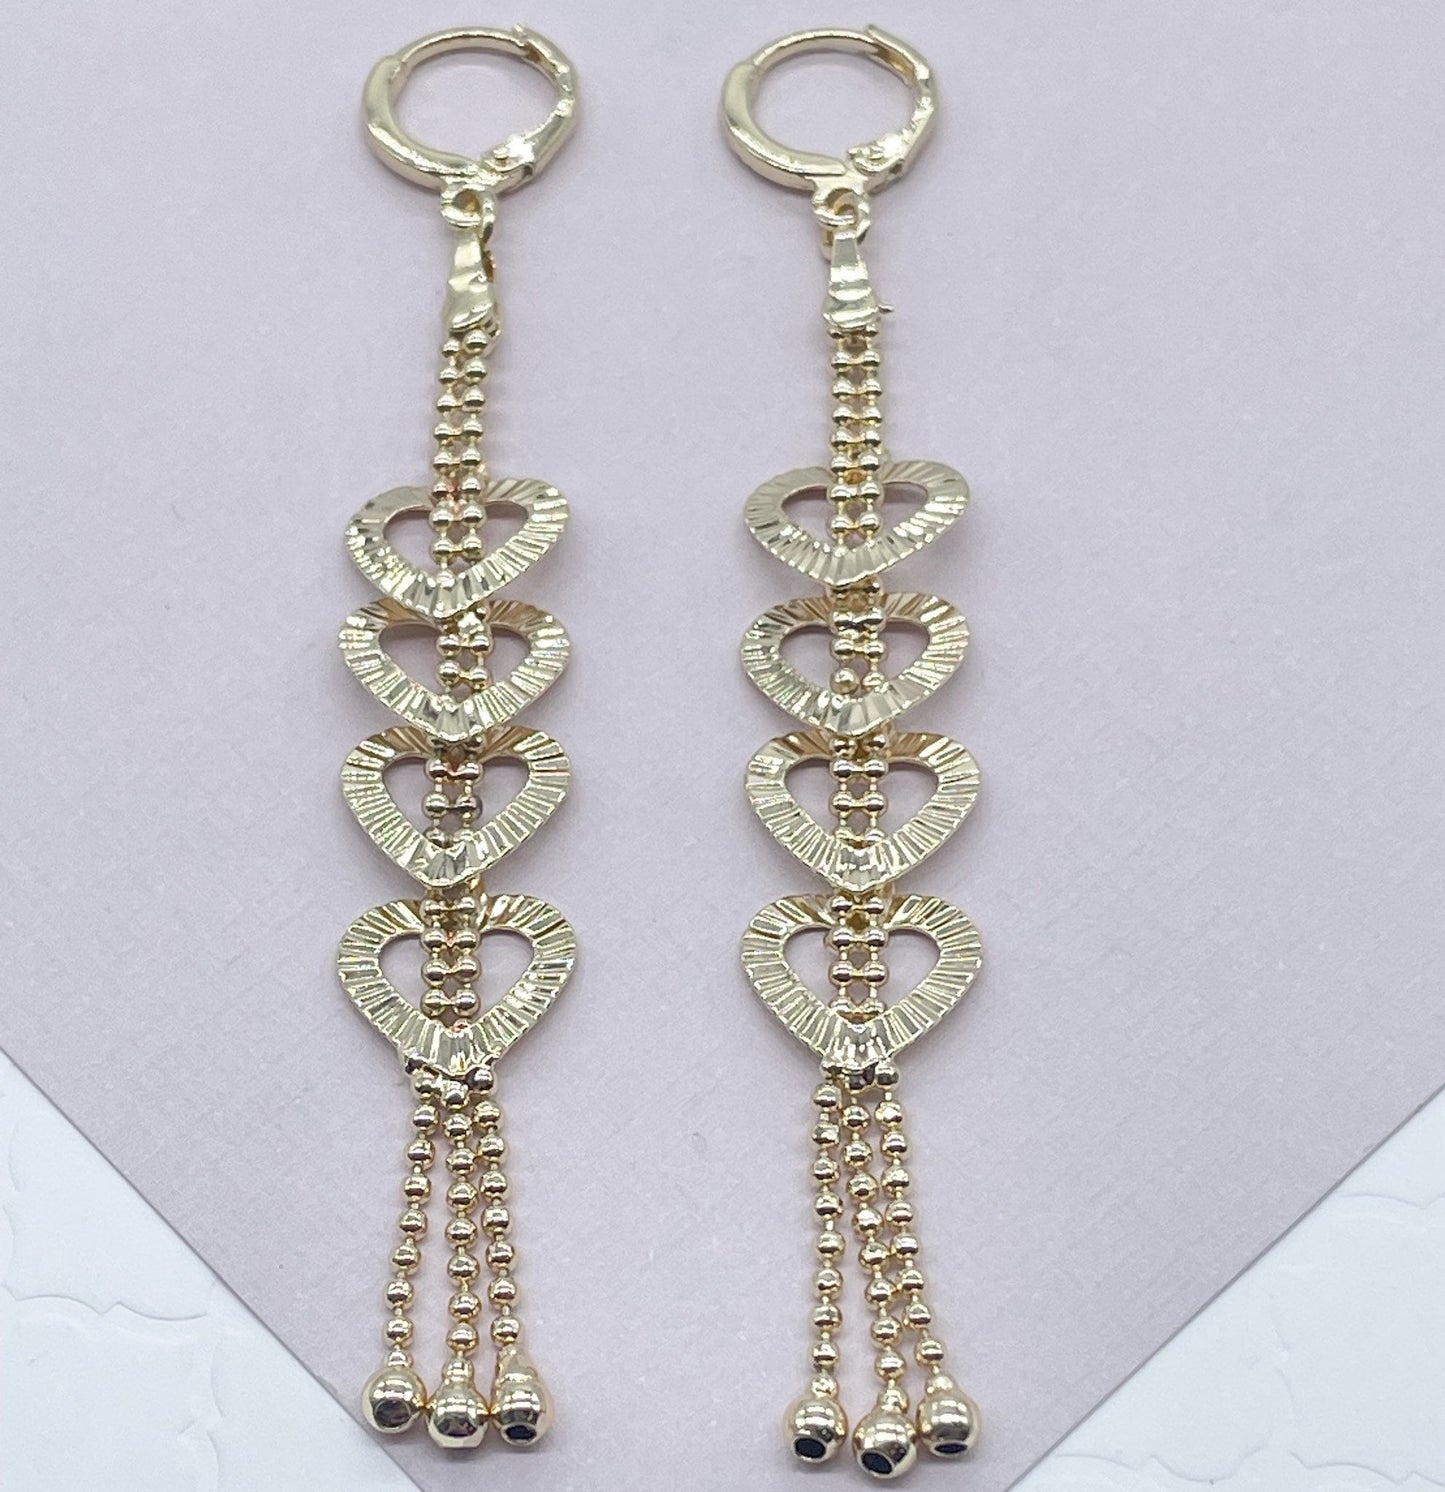 Long 18k Gold Layered Oval or Heart Shape Dangling Earrings Featuring Ball Tips